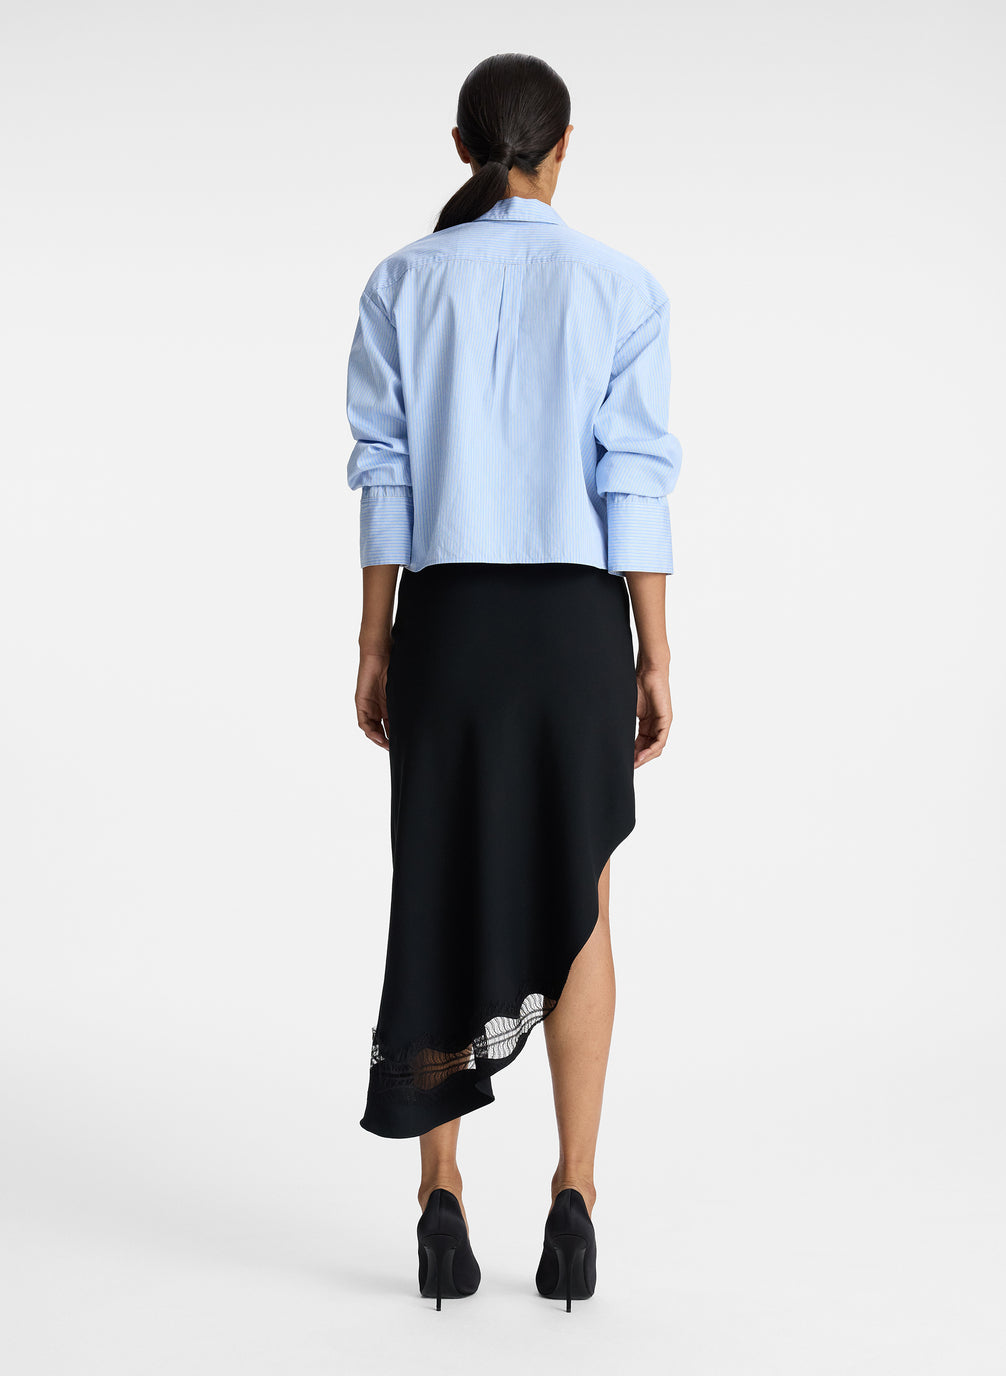 back view of woman wearing blue striped button down collared shirt and asymmetric black satin and lace skirt